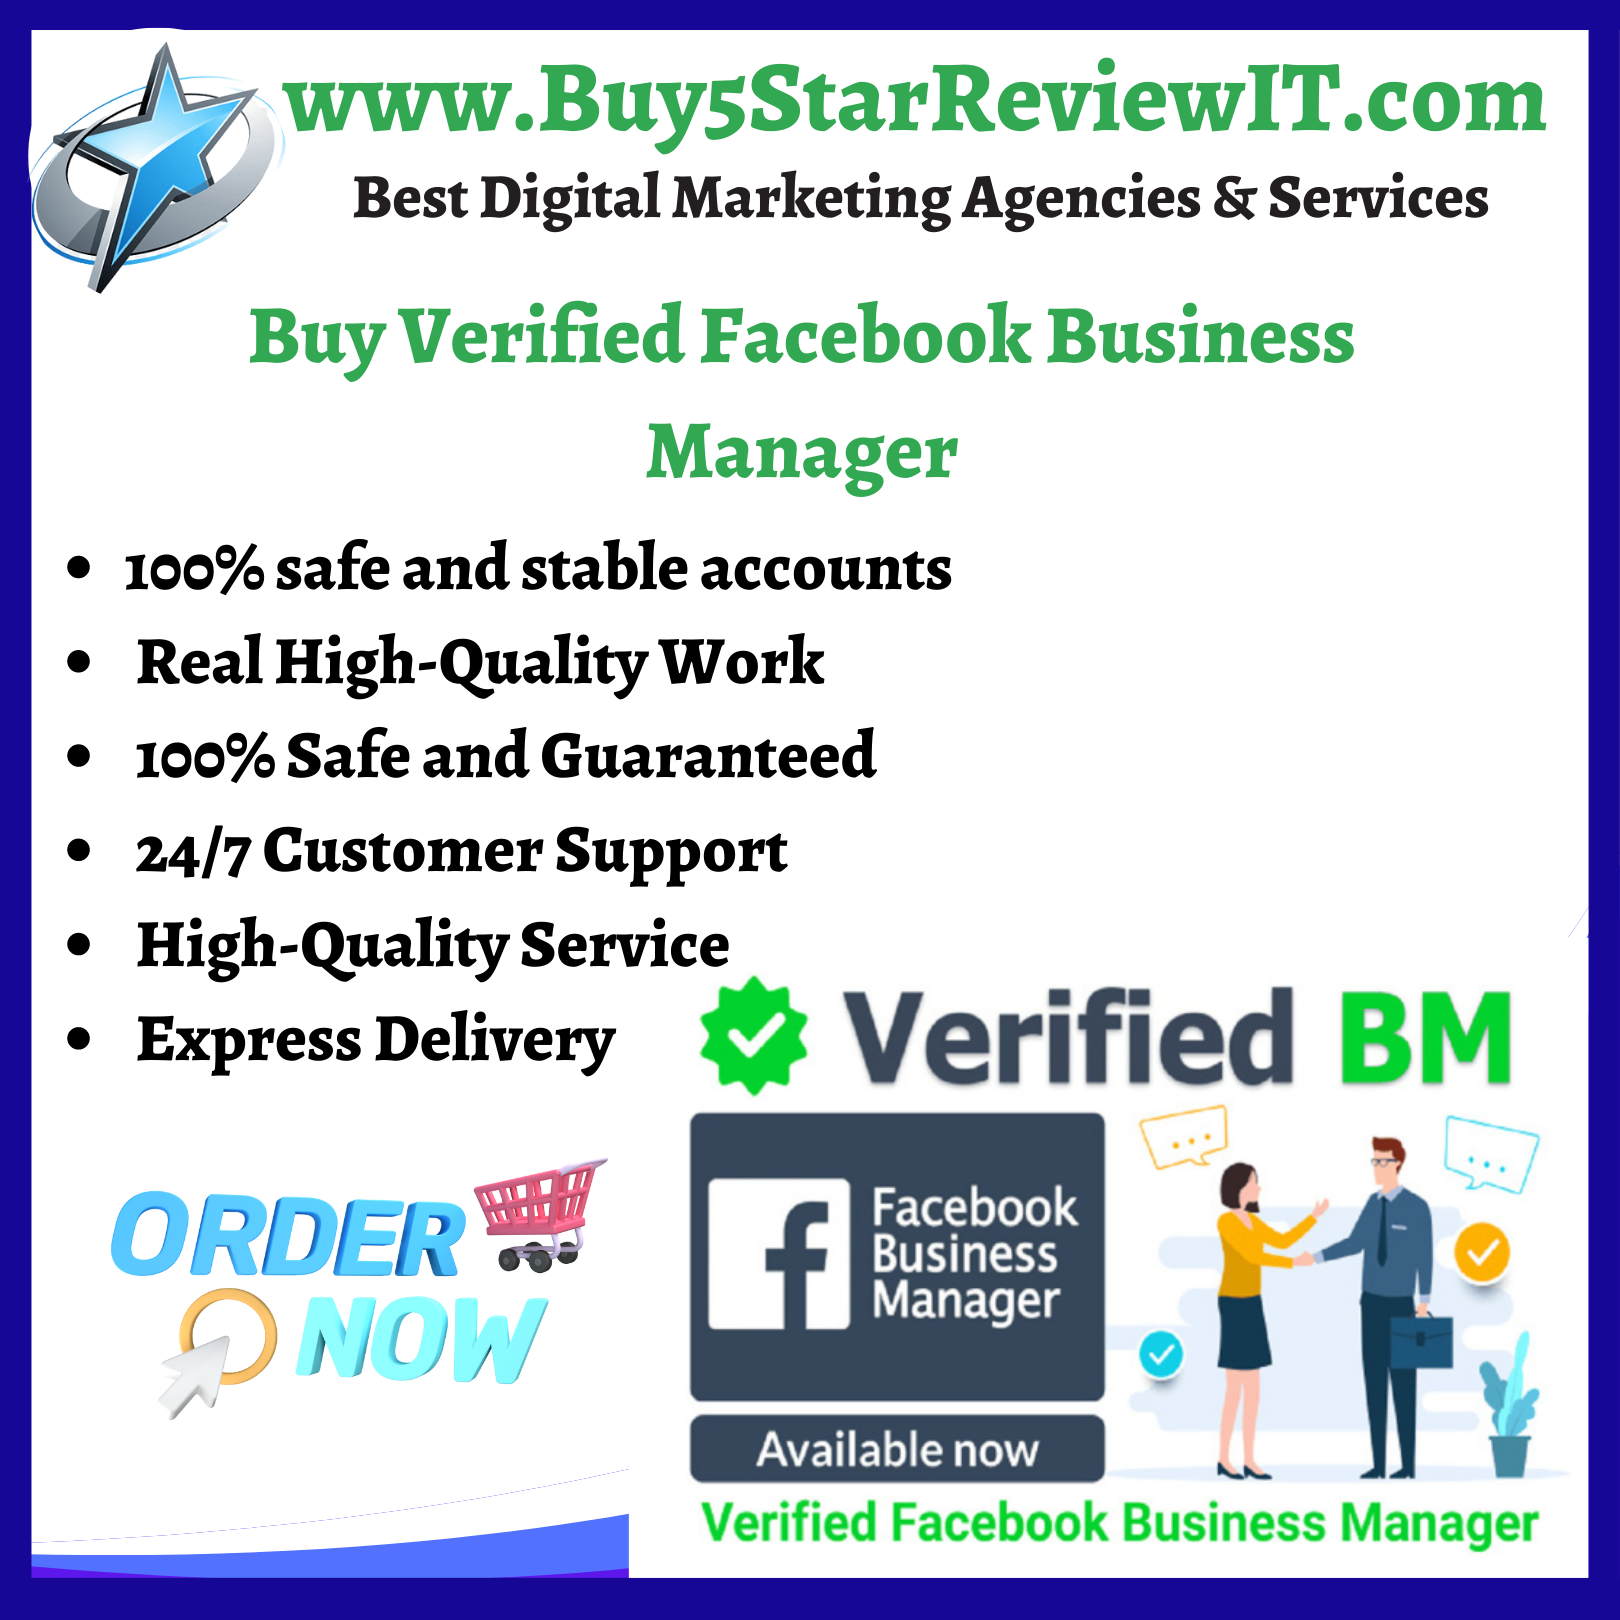 Buy Verified Facebook Business Manager - Buy5StarReviewIT